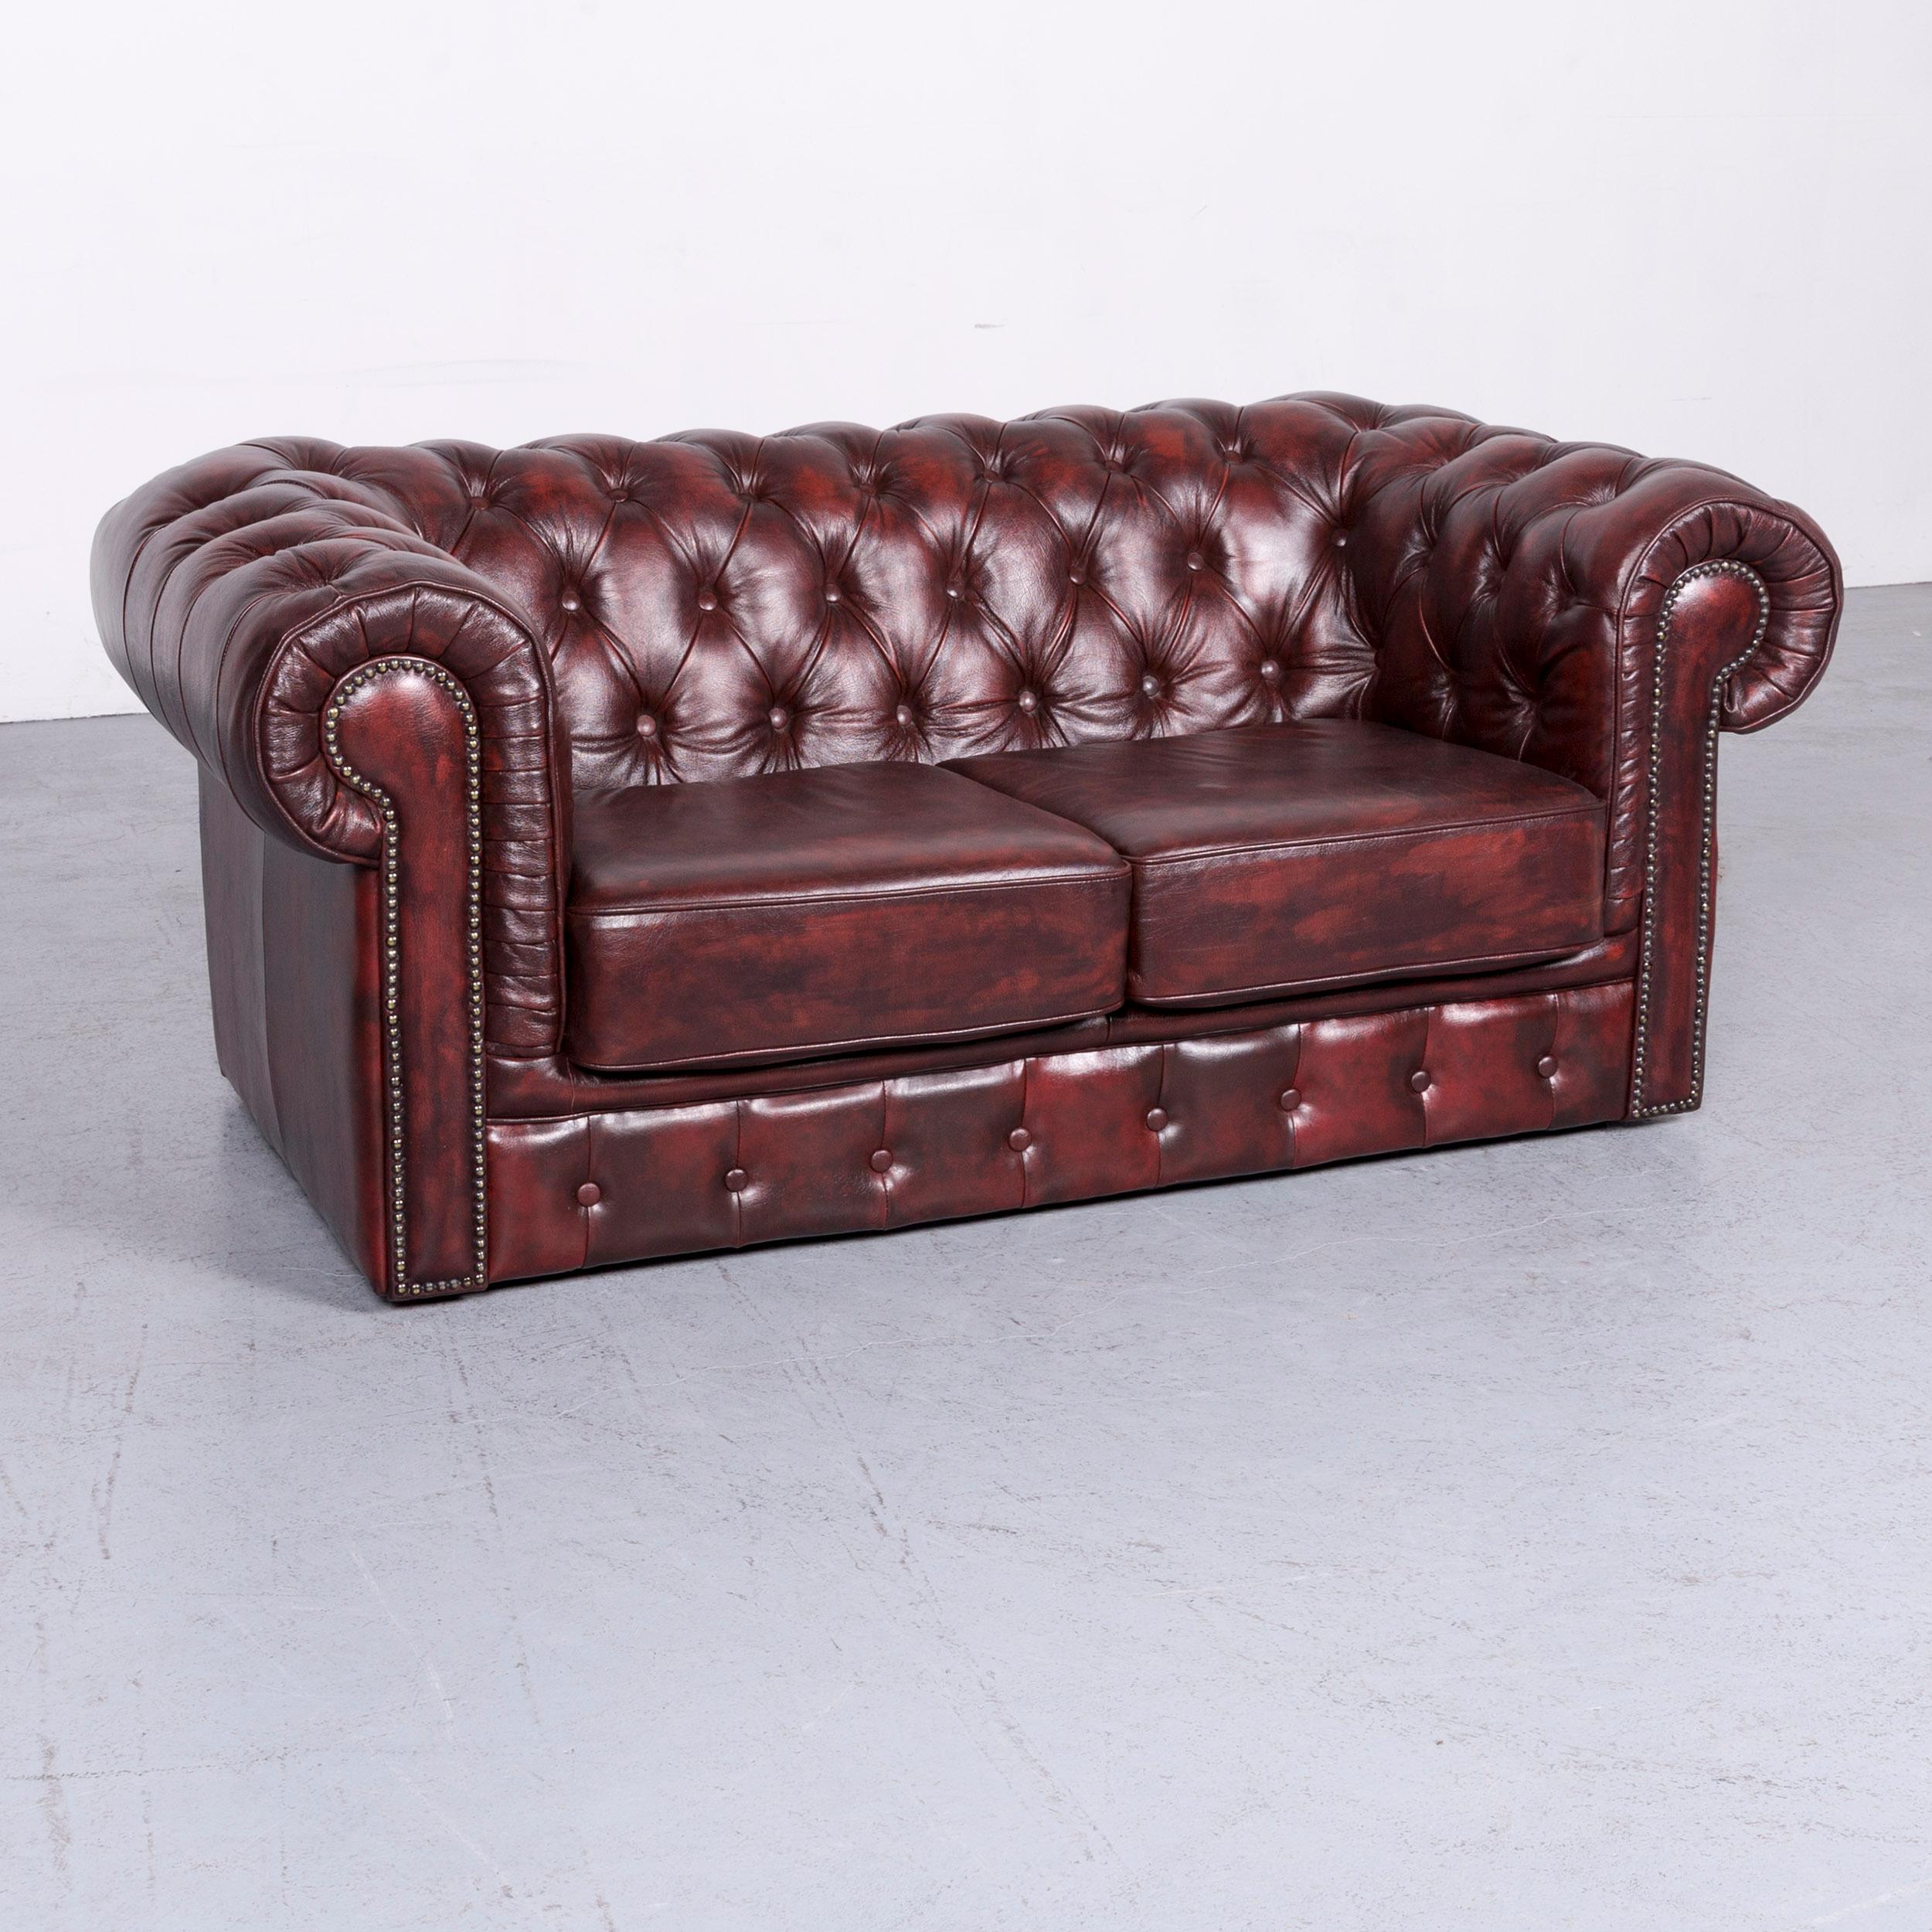 We bring to you a Chesterfield style vintage leather sofa two-seat couch red.